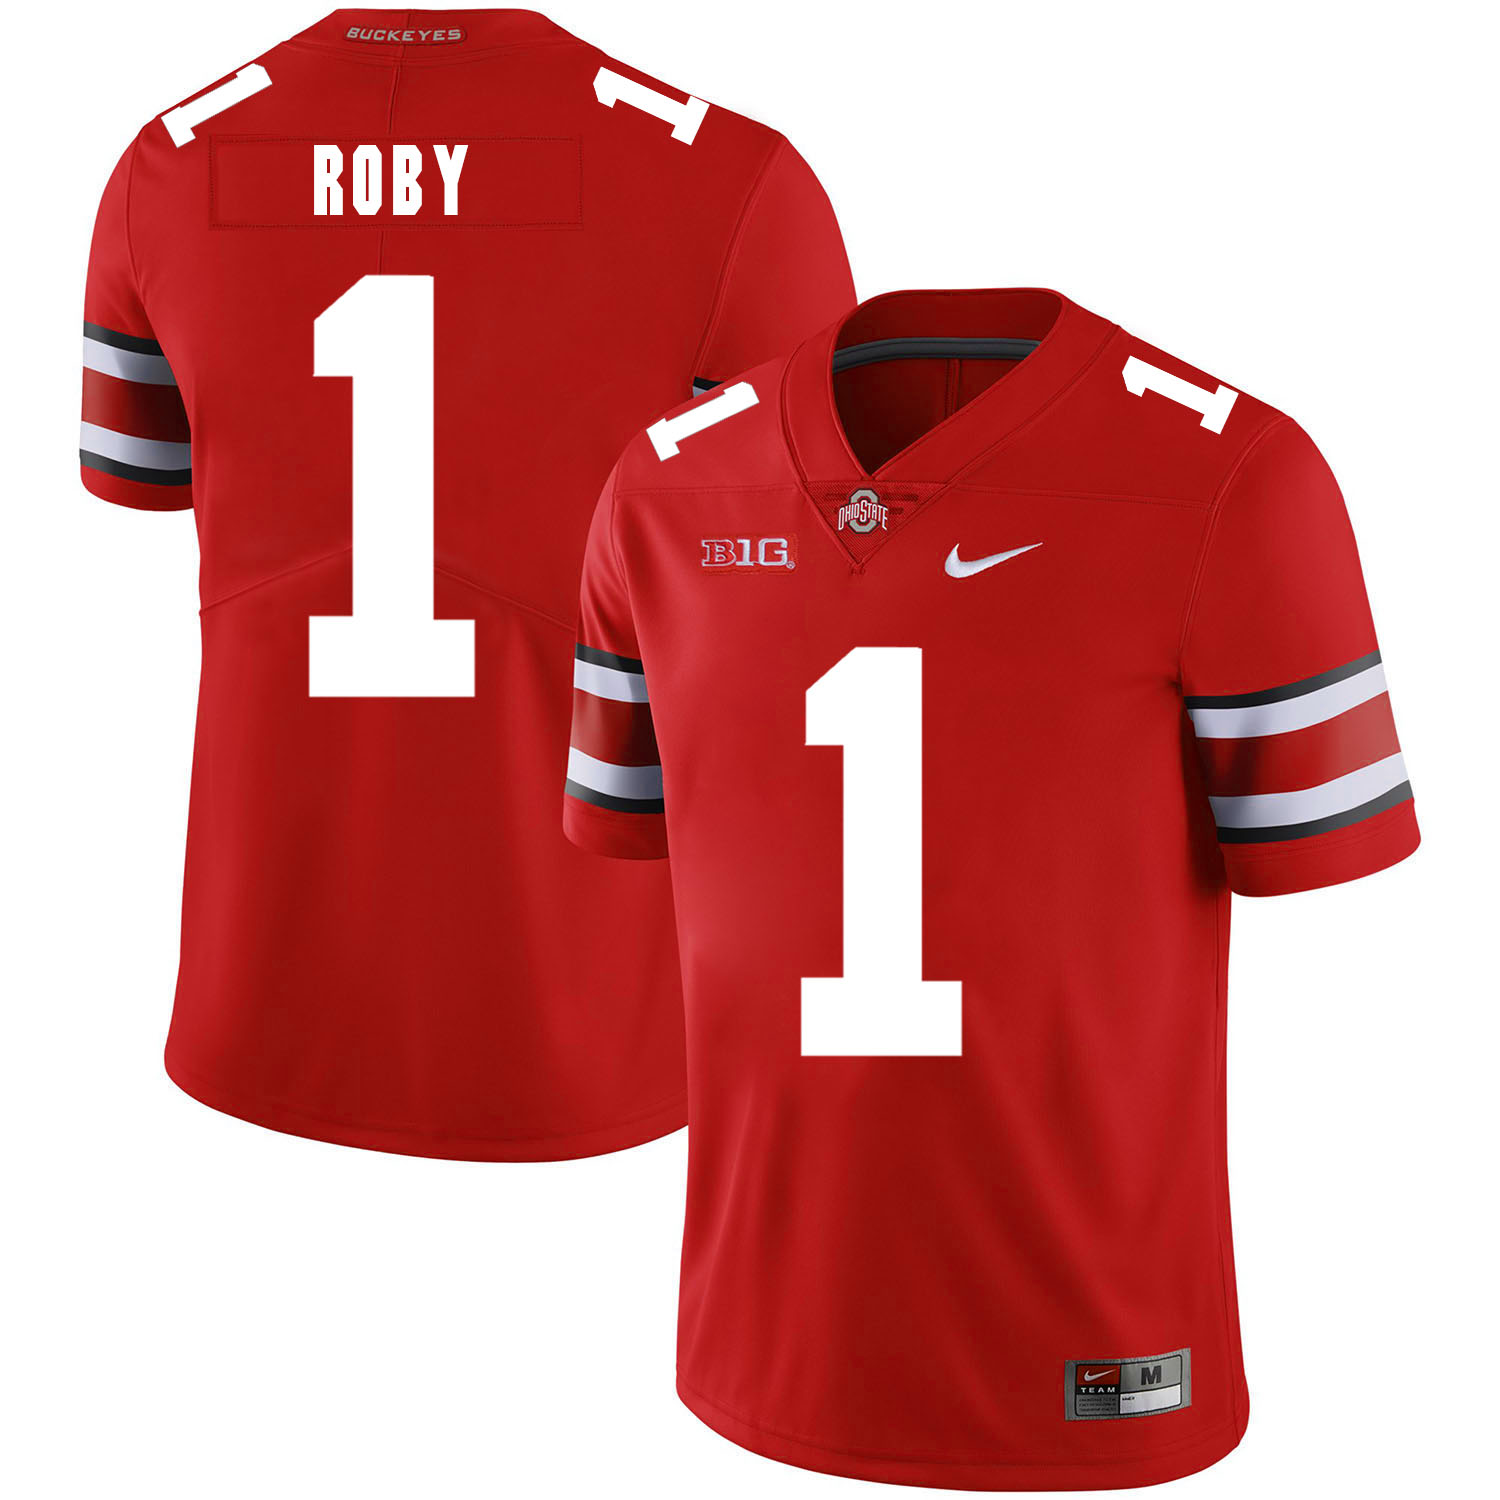 Ohio State Buckeyes 1 Bradley Roby Red Nike College Football Jersey